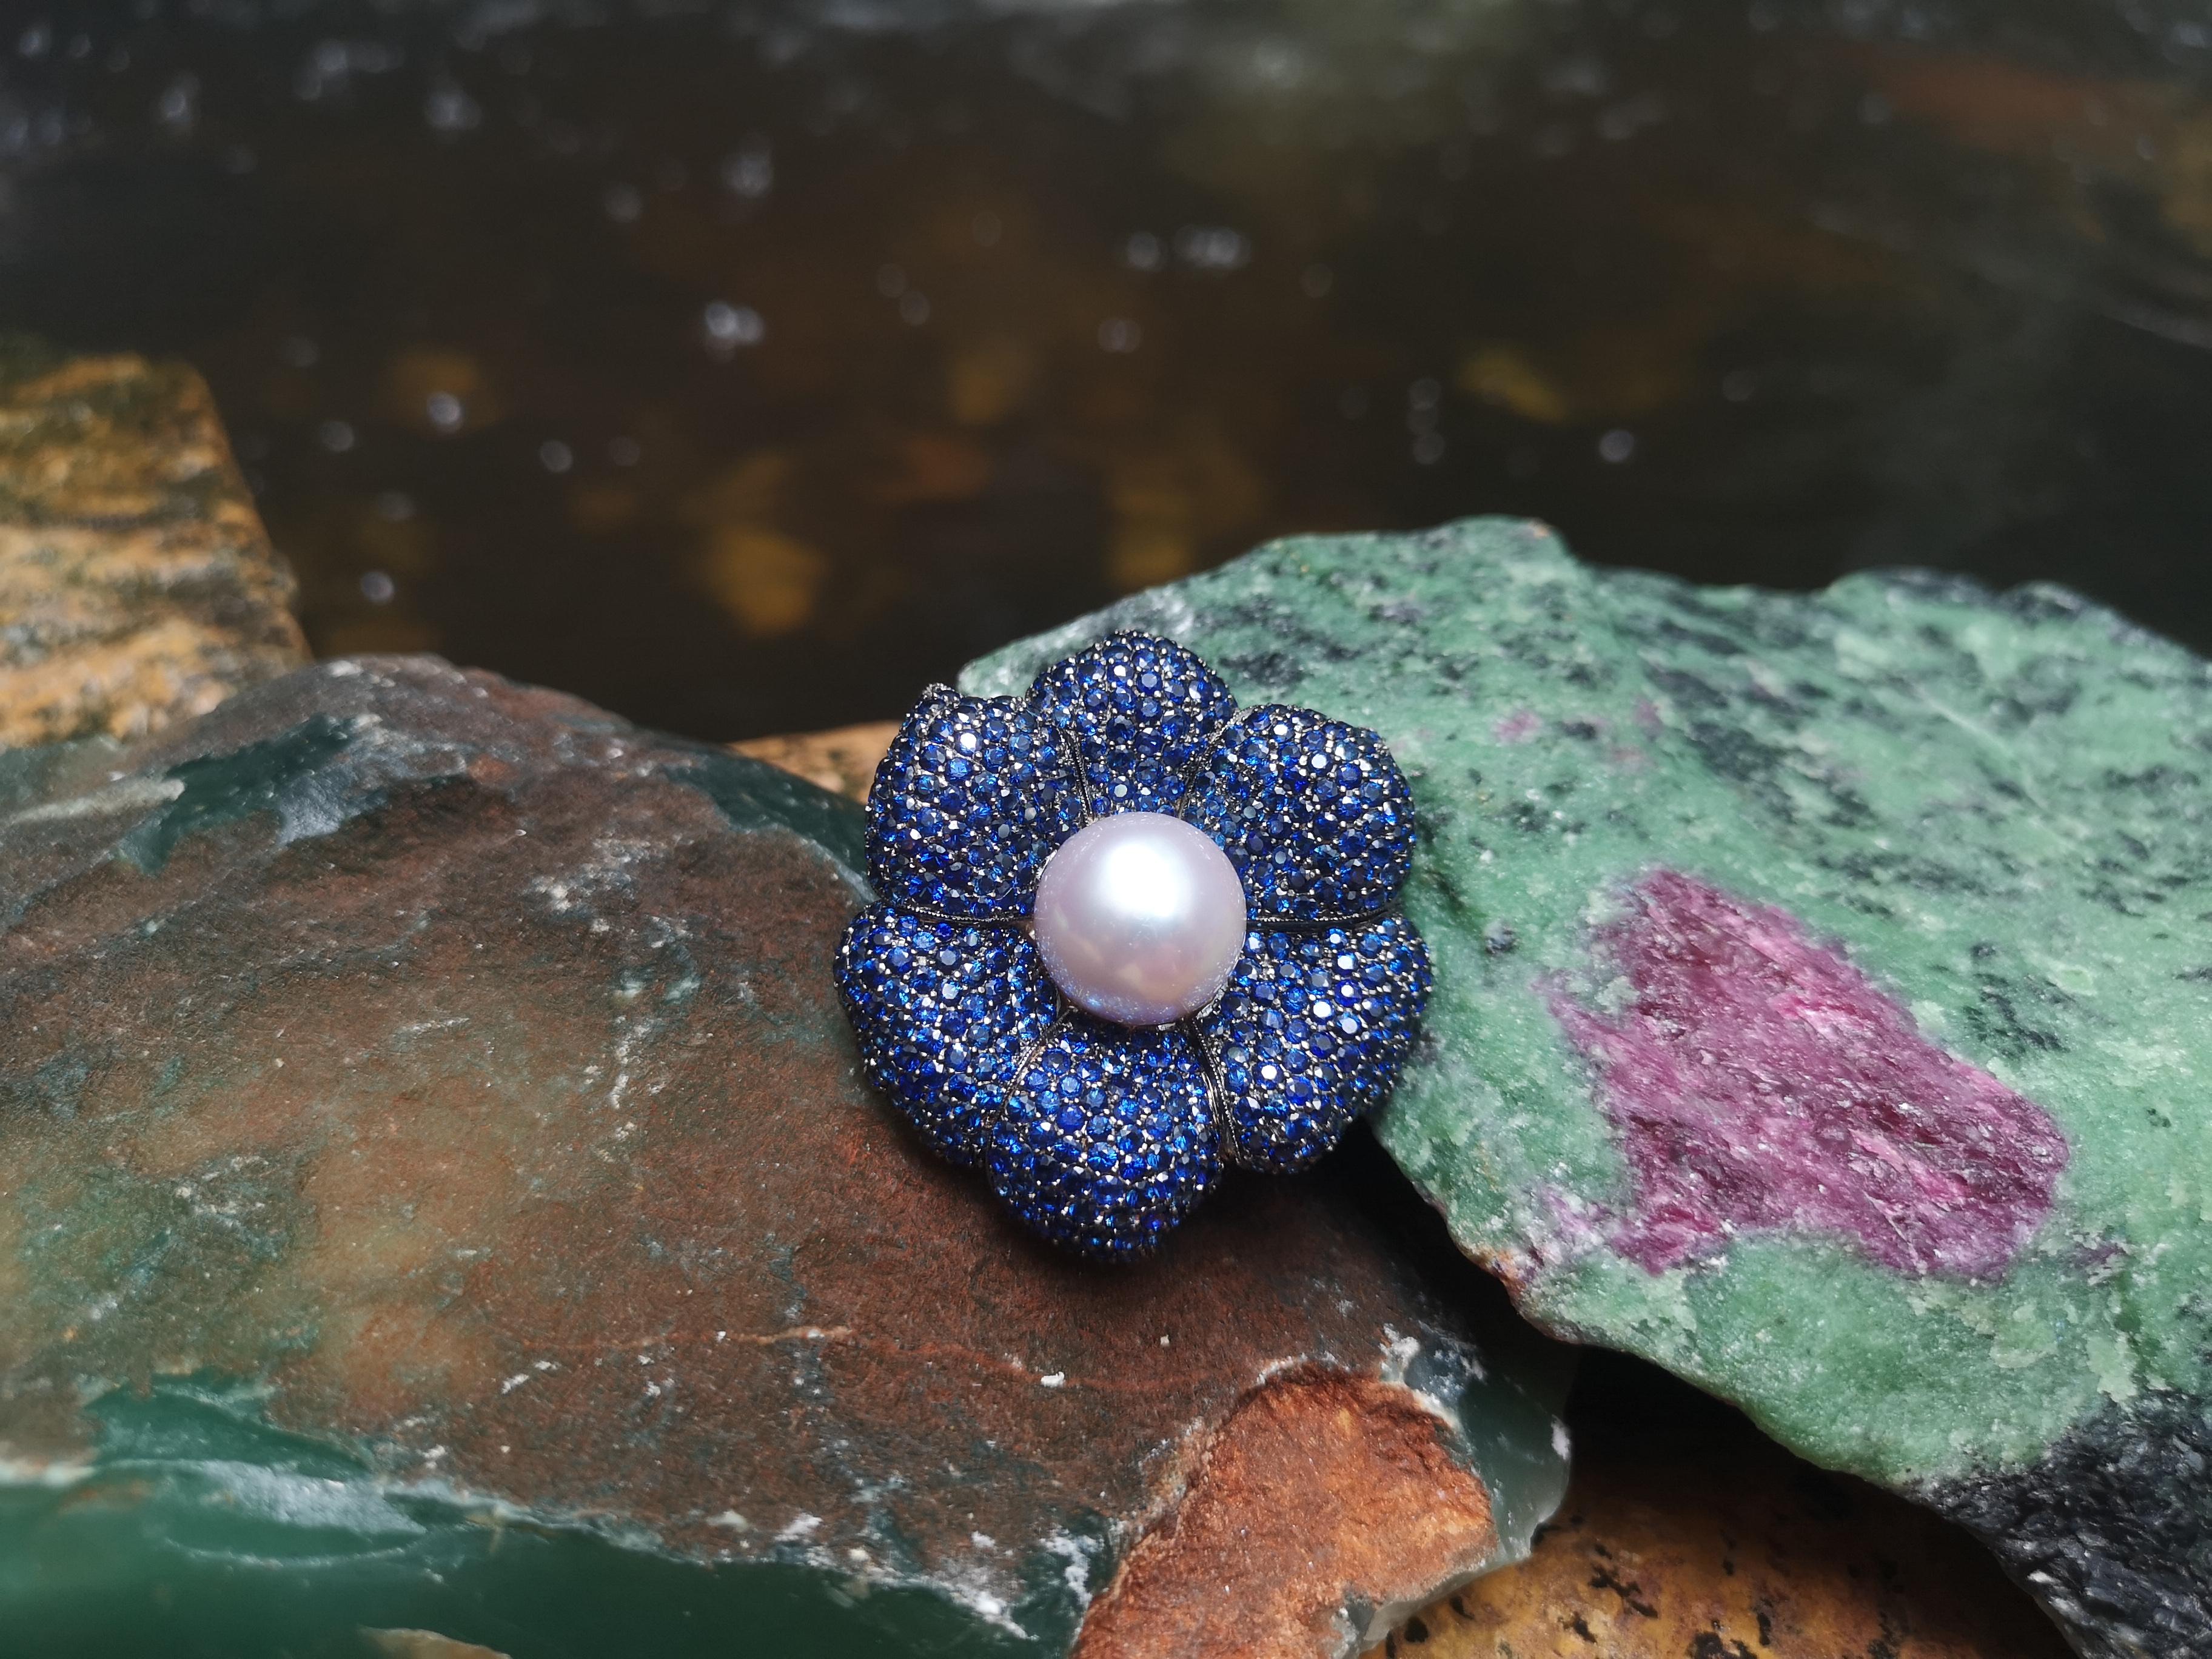 South Sea Pearl with Blue Sapphire 24.10 carats Brooch/Pendant set in 18 Karat White Gold Settings

Width: 5.2 cm 
Length: 5.2 cm
Total Weight: 24.99 grams

